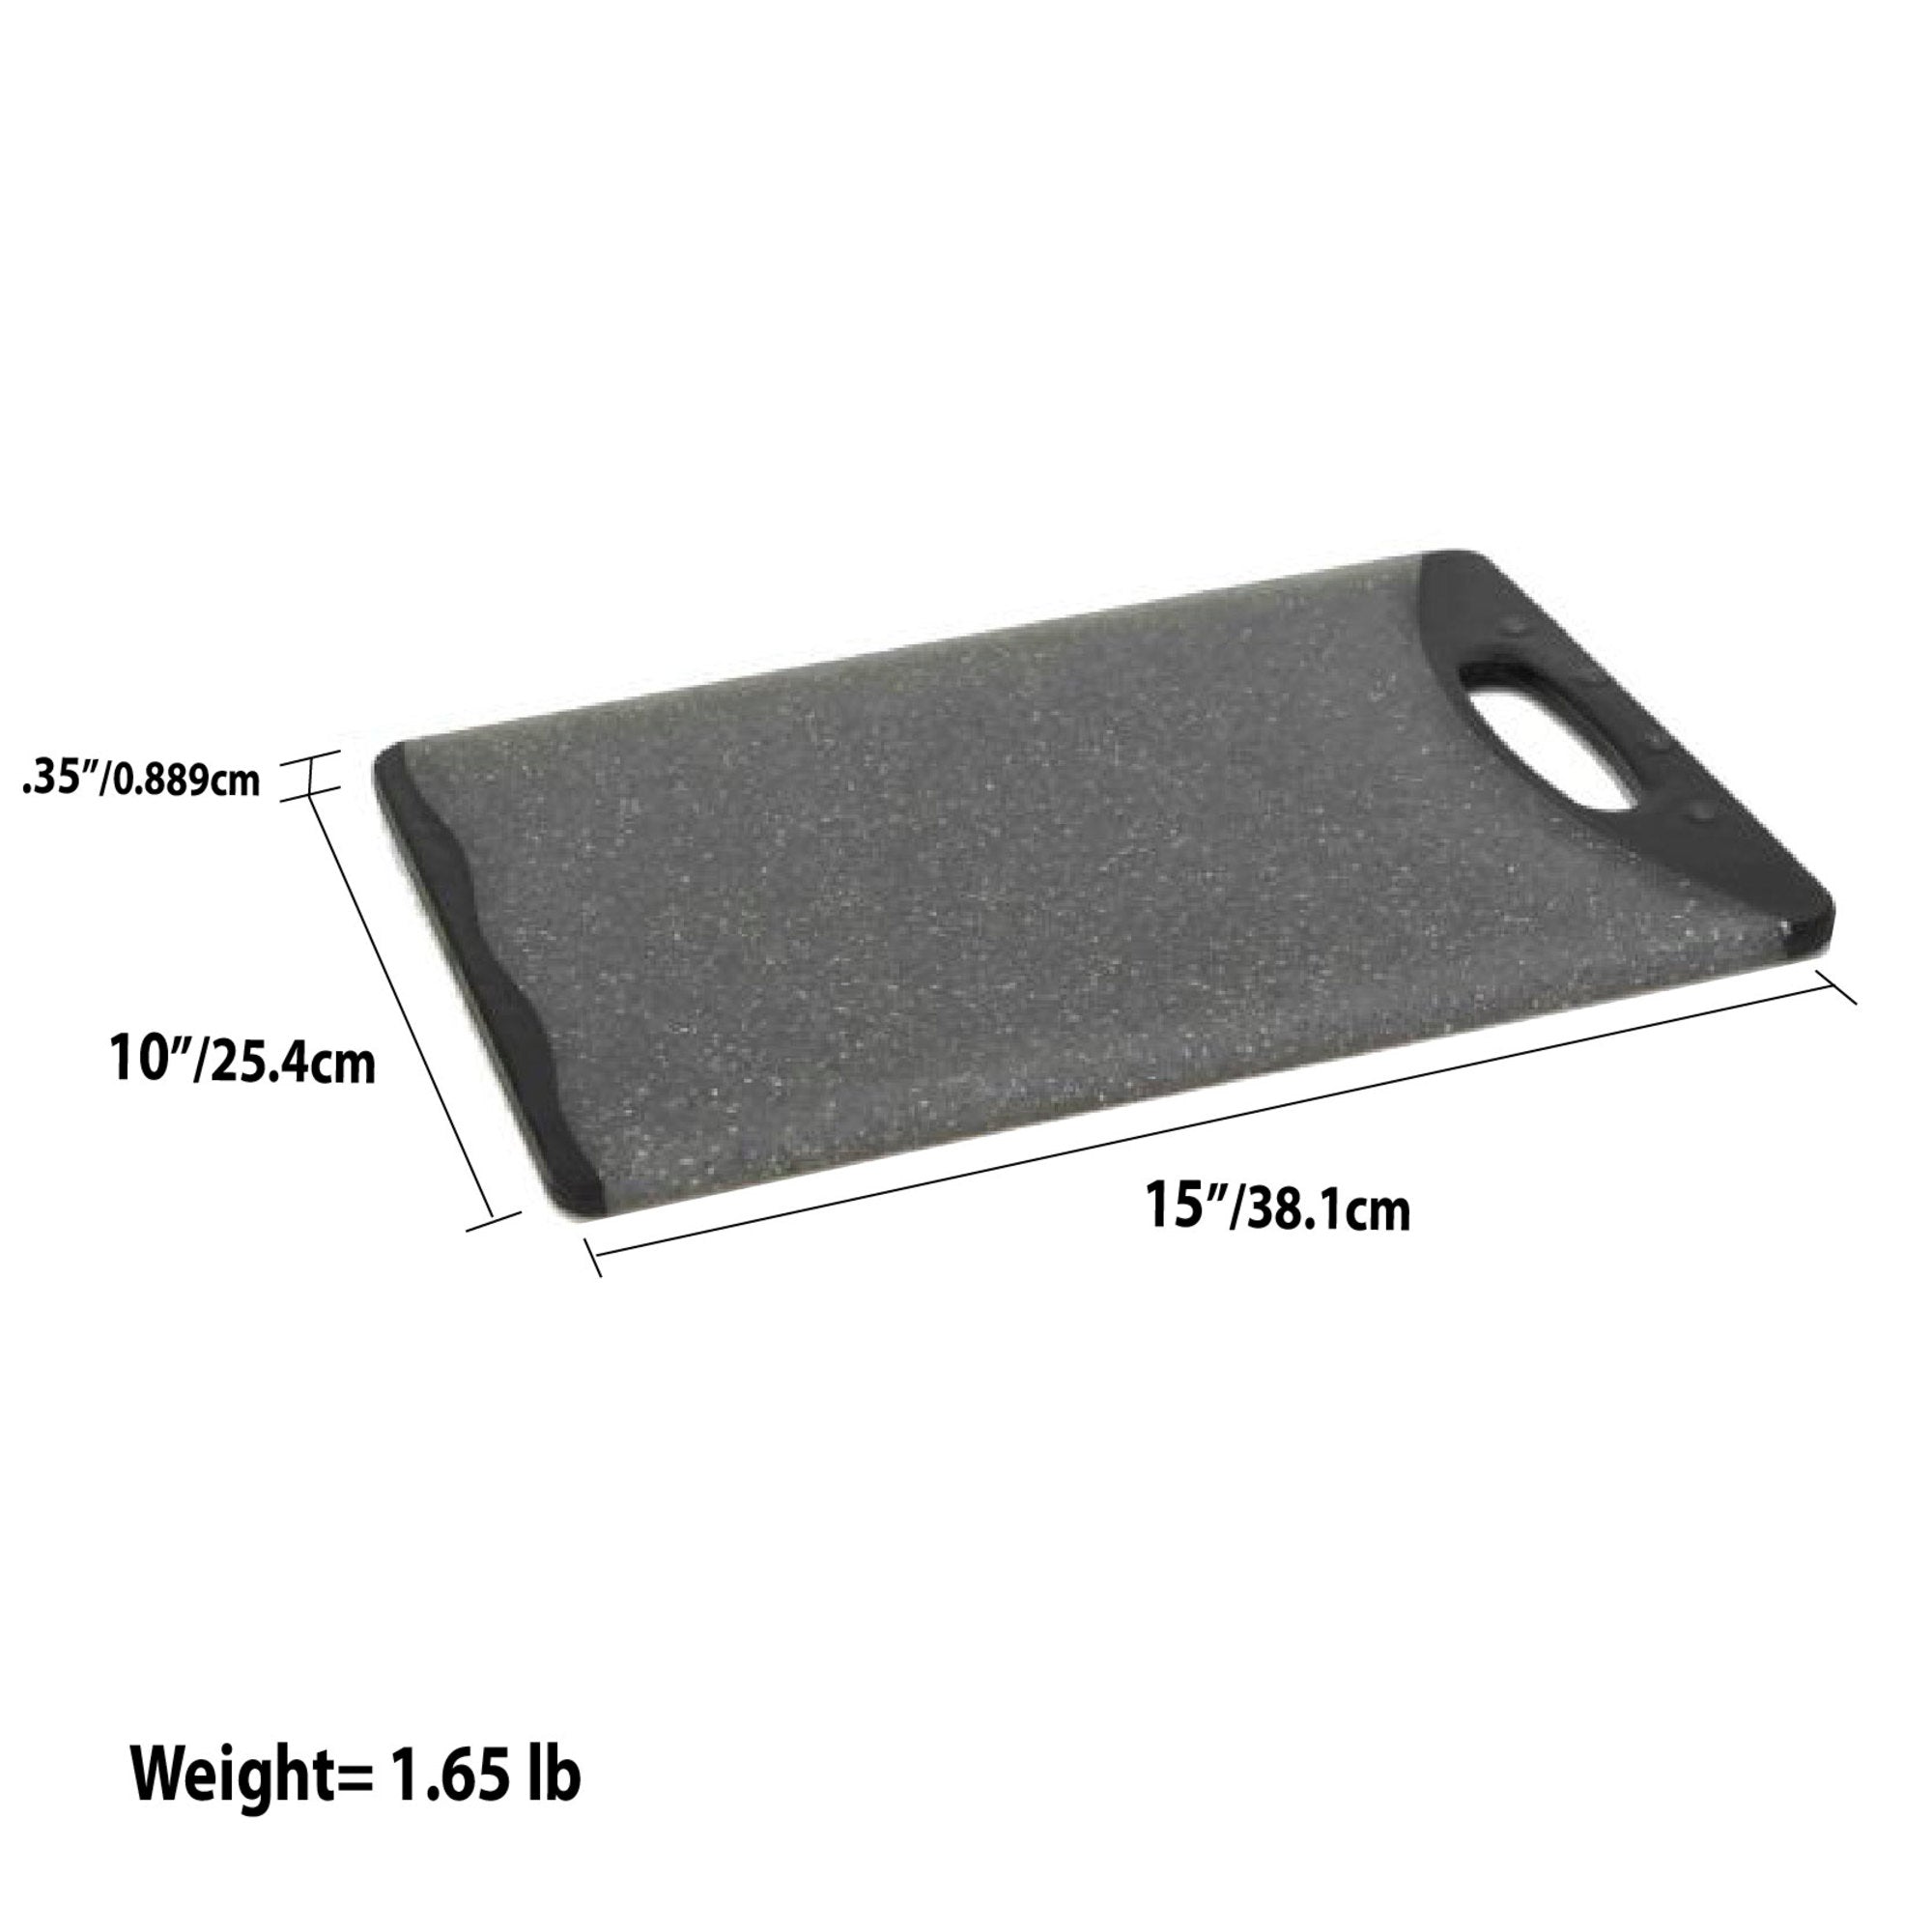 Home Basics Double Sided 10" x 14.5" Granite Plastic Cutting Board - Assorted Colors